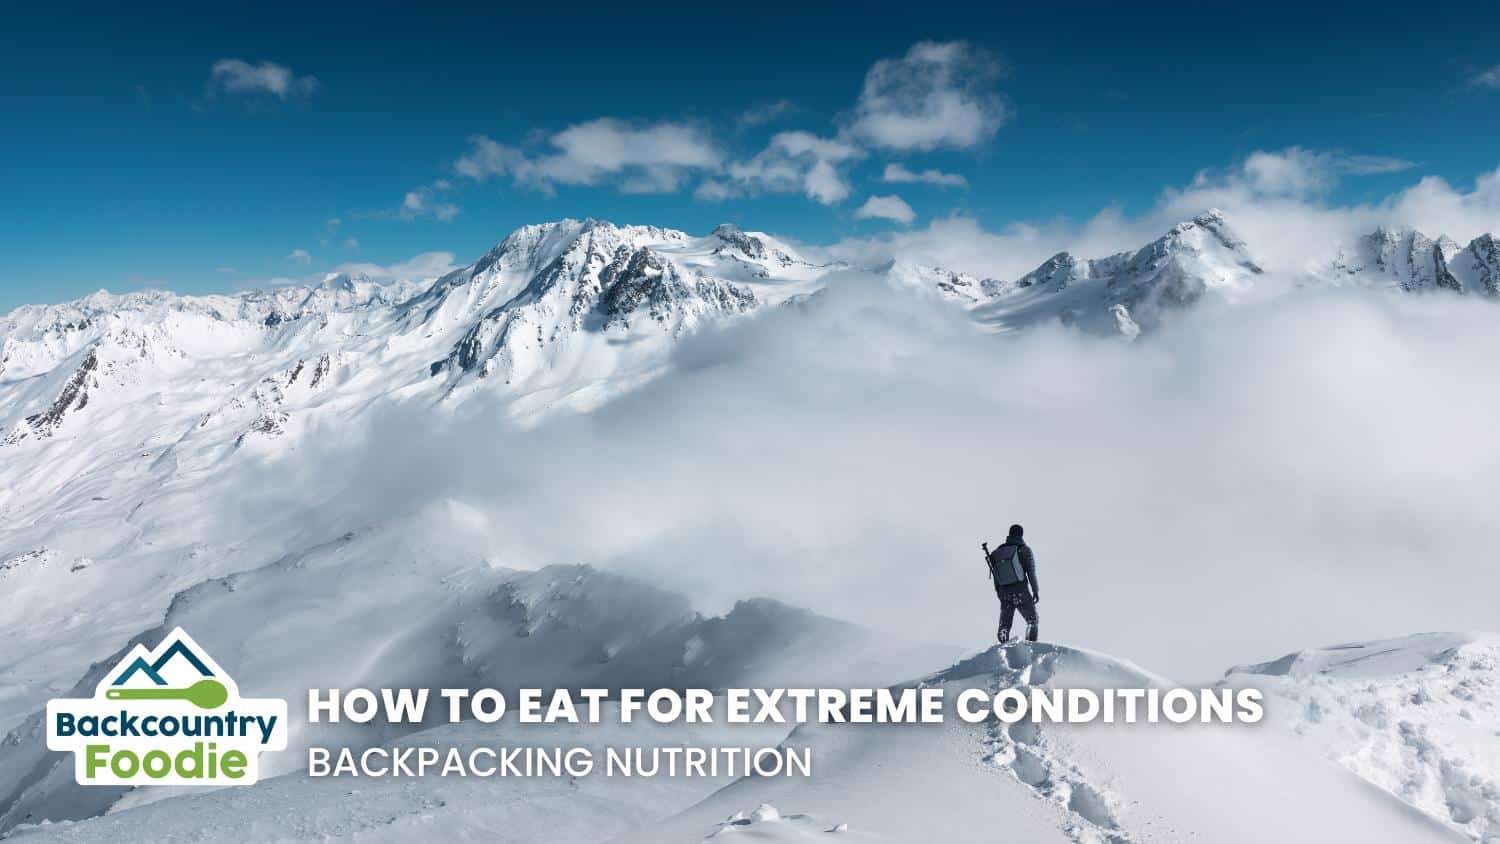 Backcountry Foodie How to Eat for Extreme Conditions Backpacking Nutrition blog thumbnail